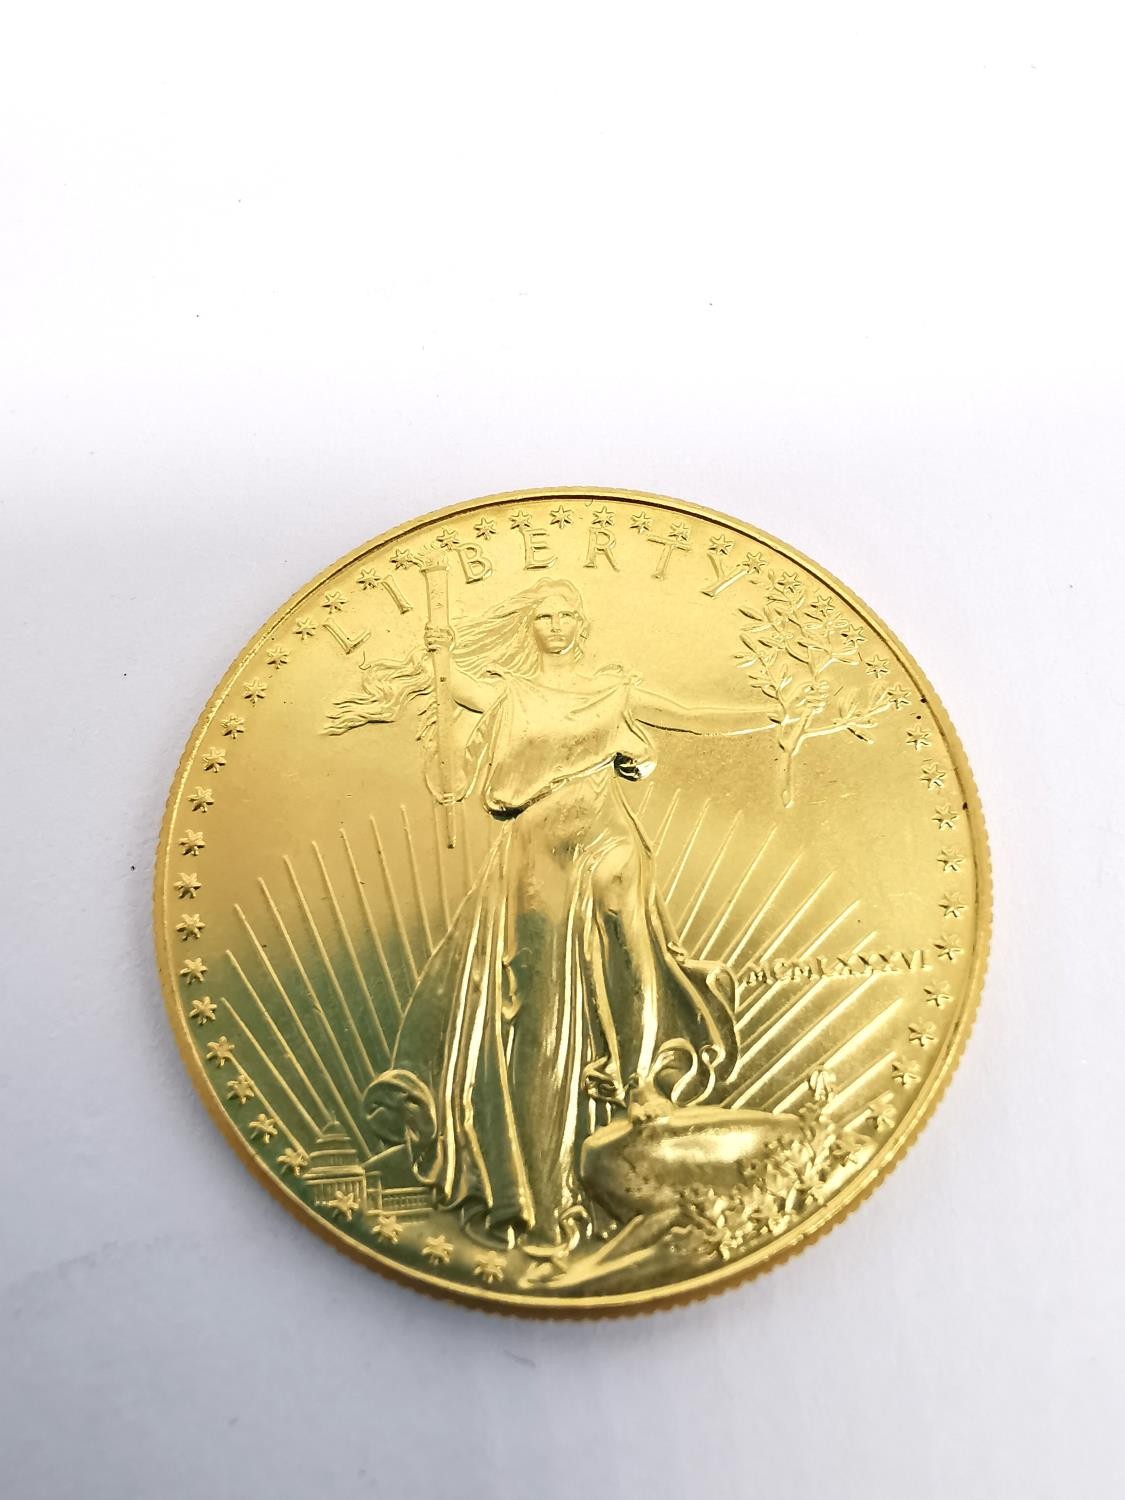 United States of America 50 Dollar Liberty - Eagle Gold Coin, date 1987, mint condition, weight 34. - Image 4 of 8